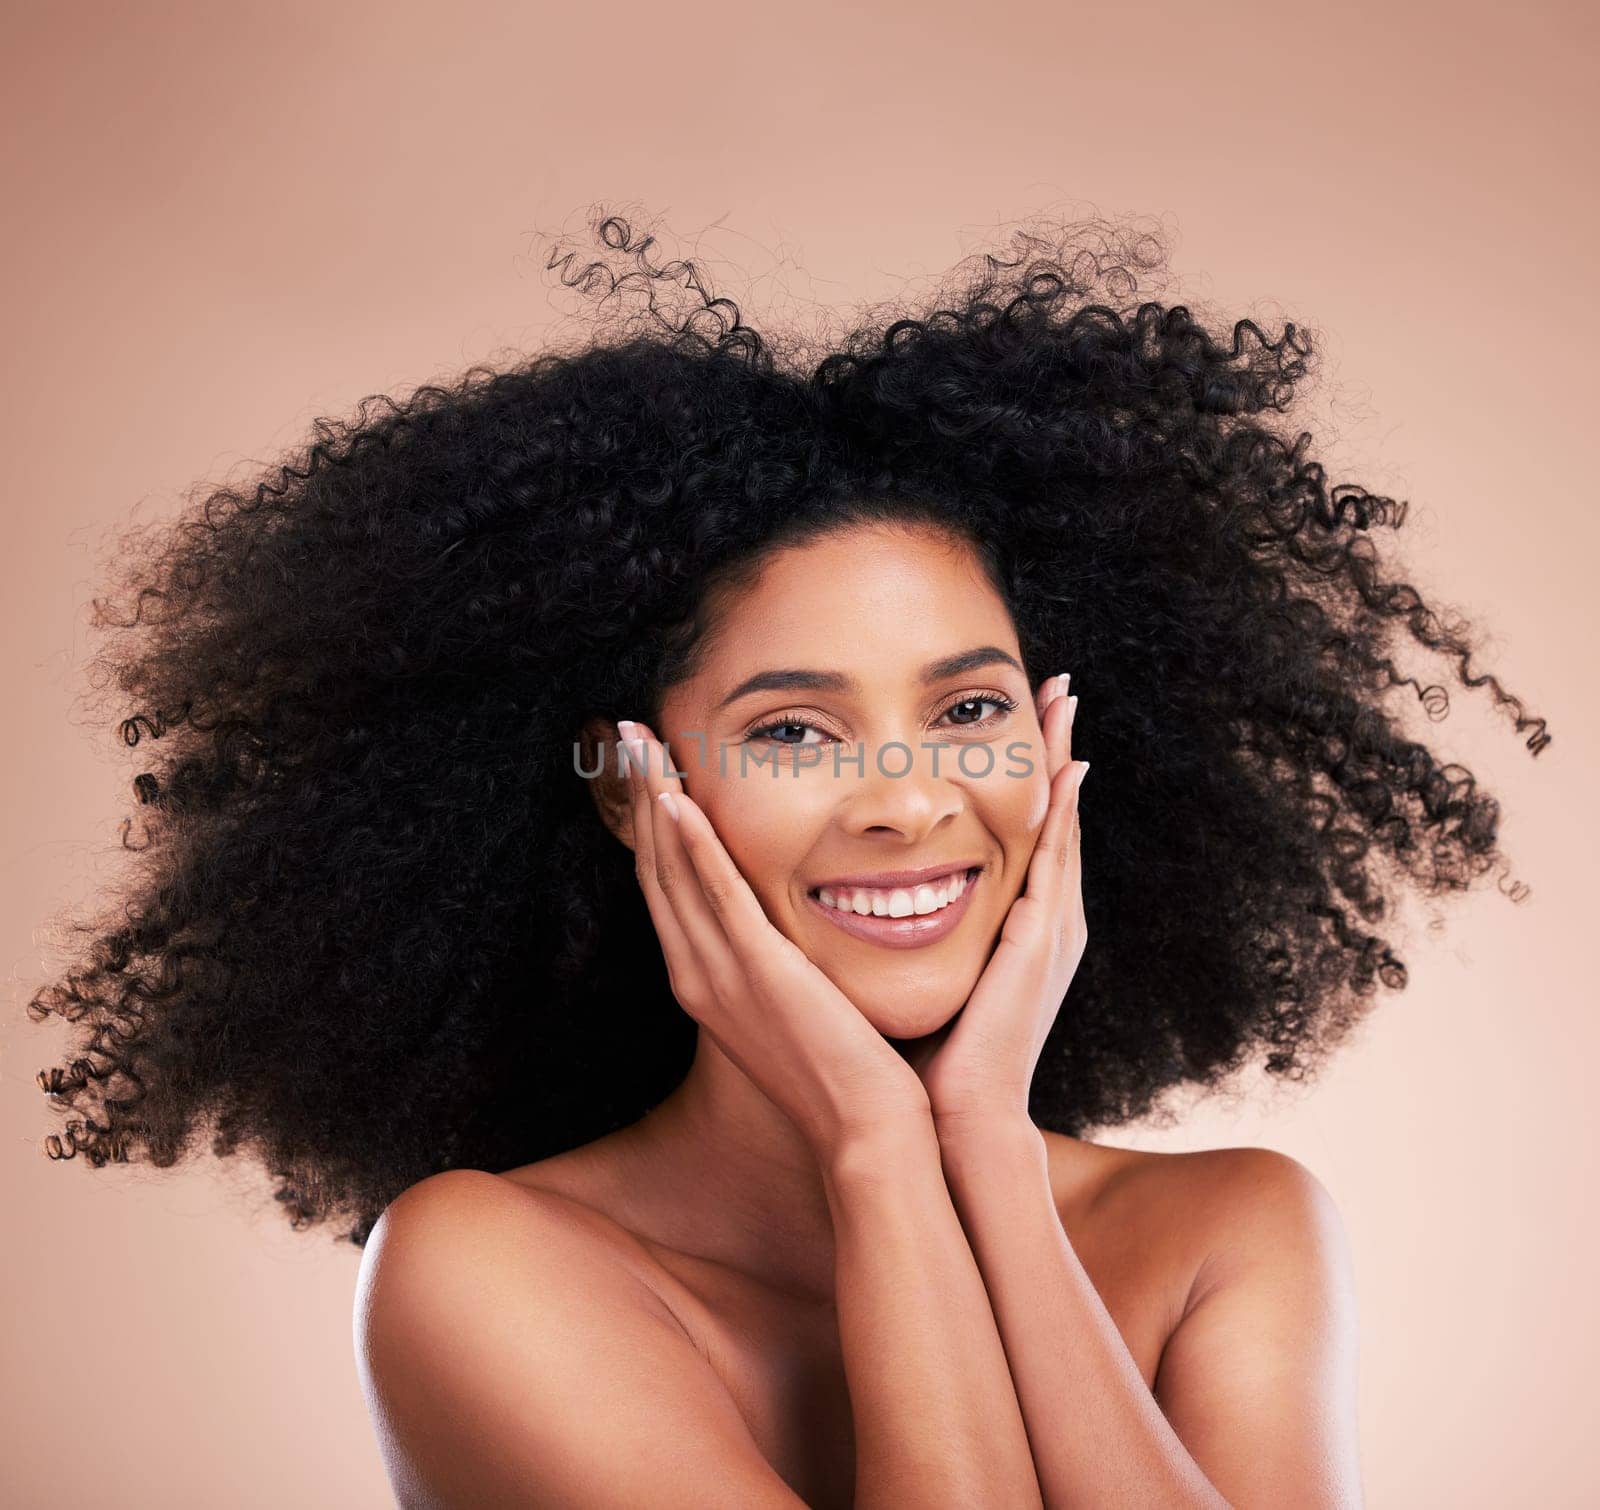 Happy model, portrait and afro hair on studio background in aesthetic wellness, curly texture pride or skincare glow. Black woman beauty, happy or smile with natural hairstyle, face hands or isolated.